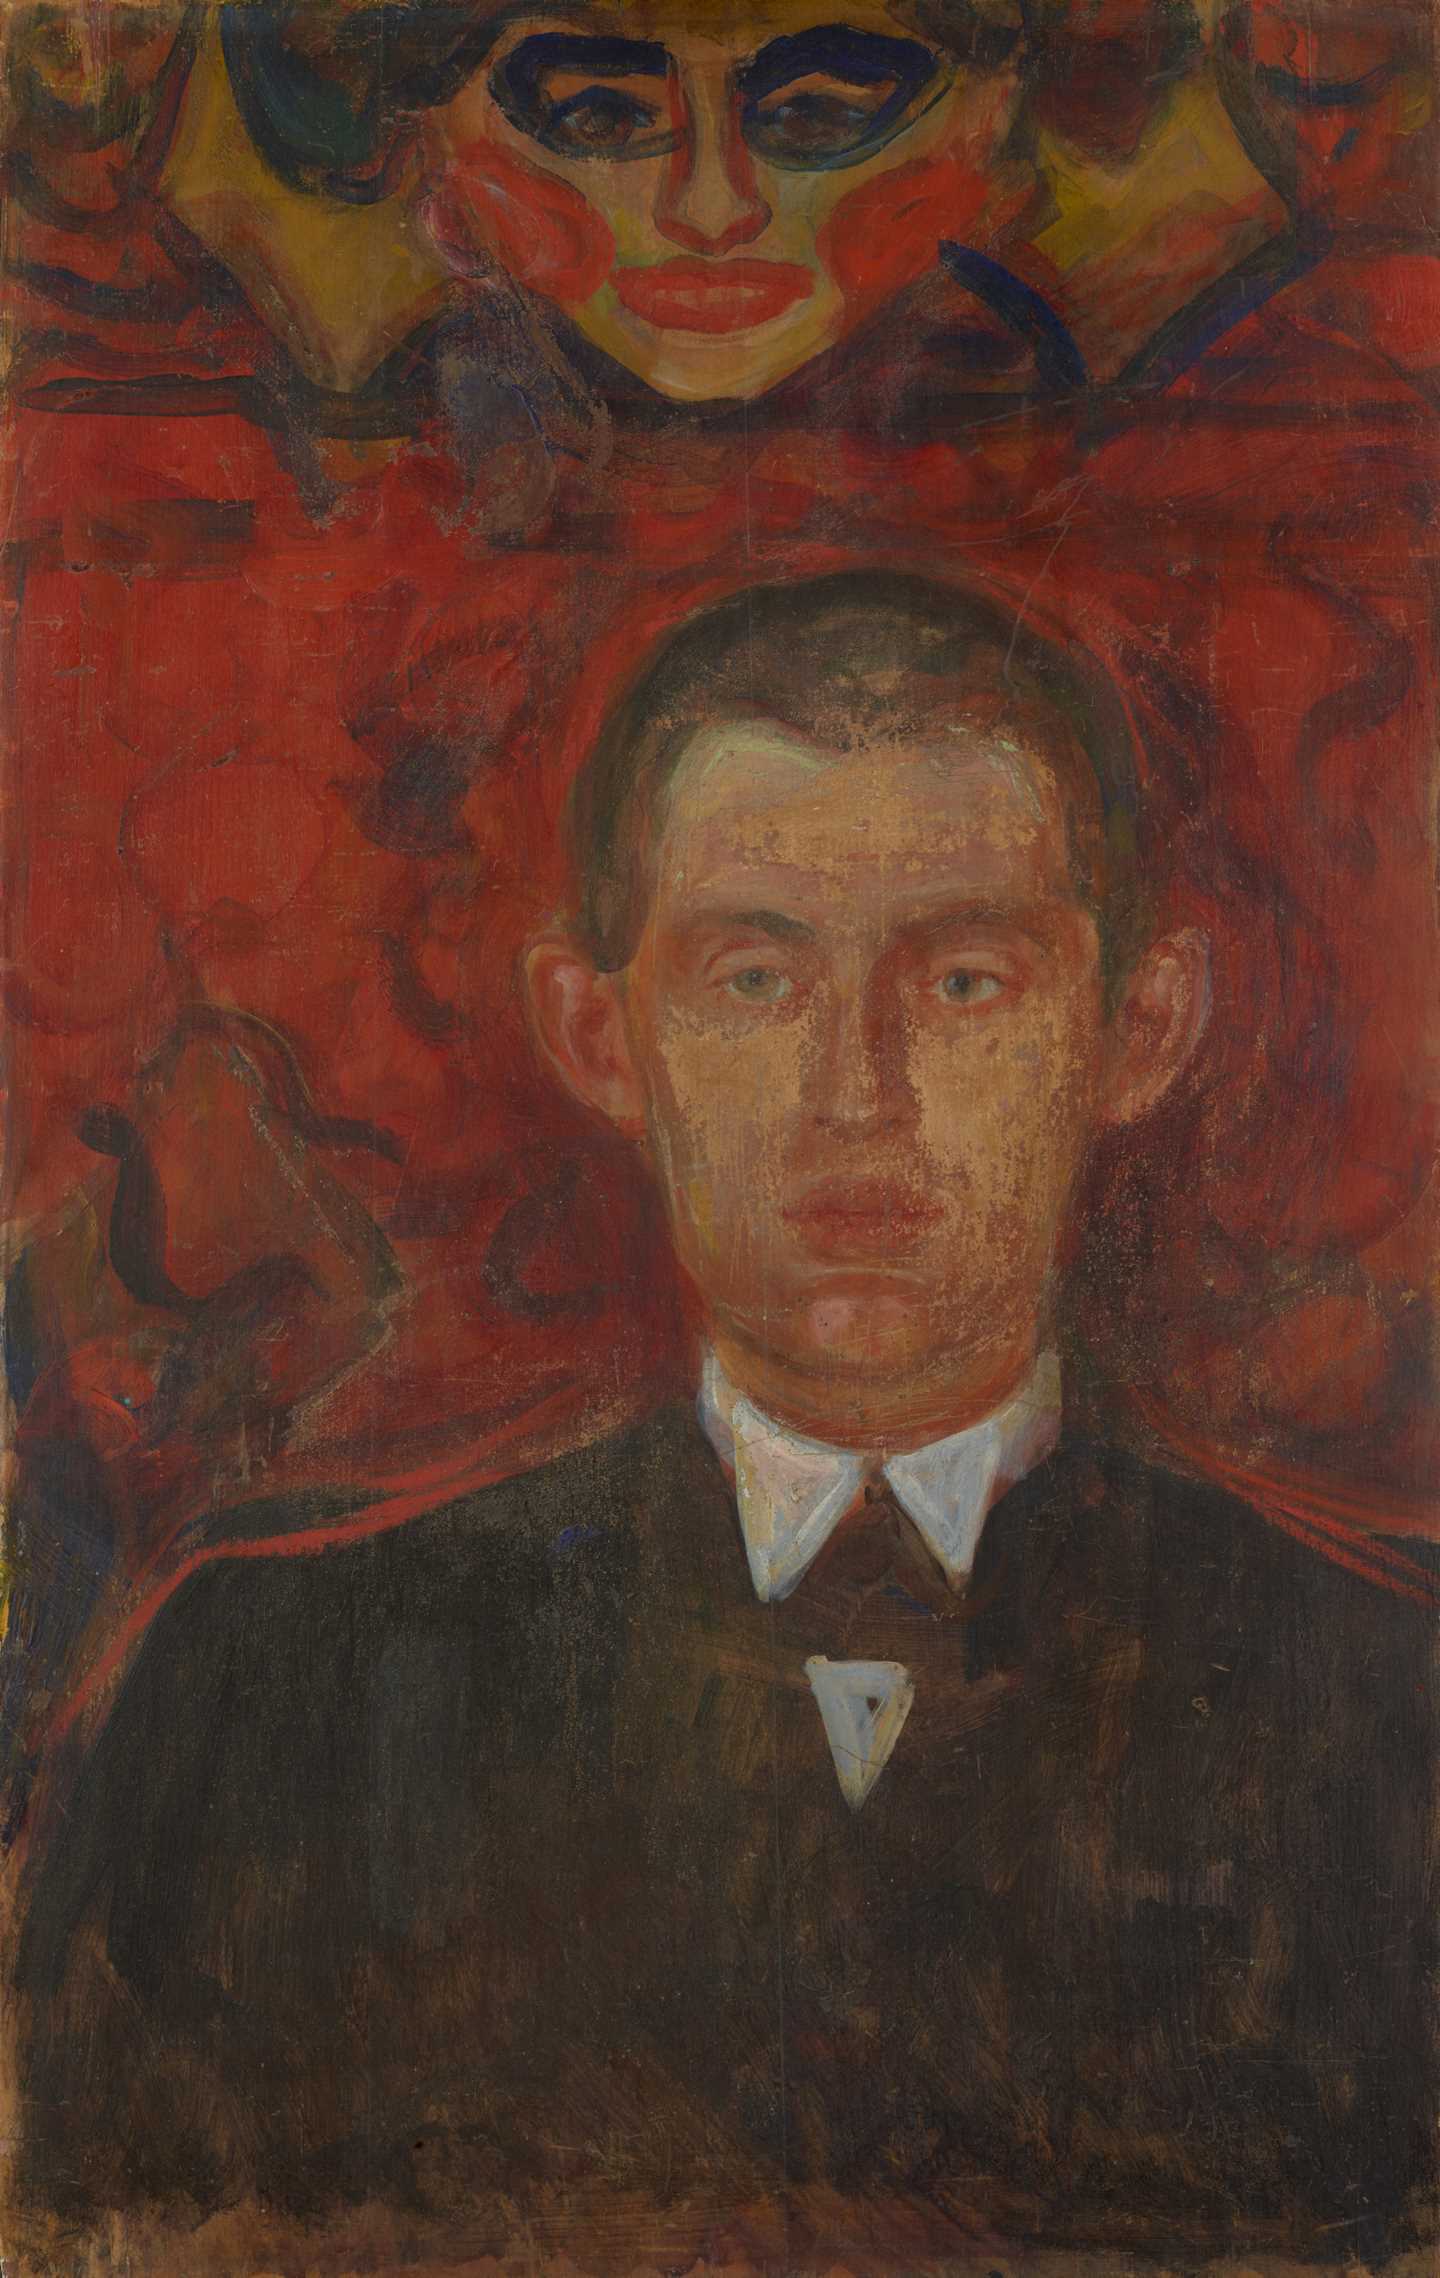 Edvard Munch: Self-Portrait under the Mask of a Woman. Tempera on unprimed wooden panel, 1893. Photo © Munchmuseet